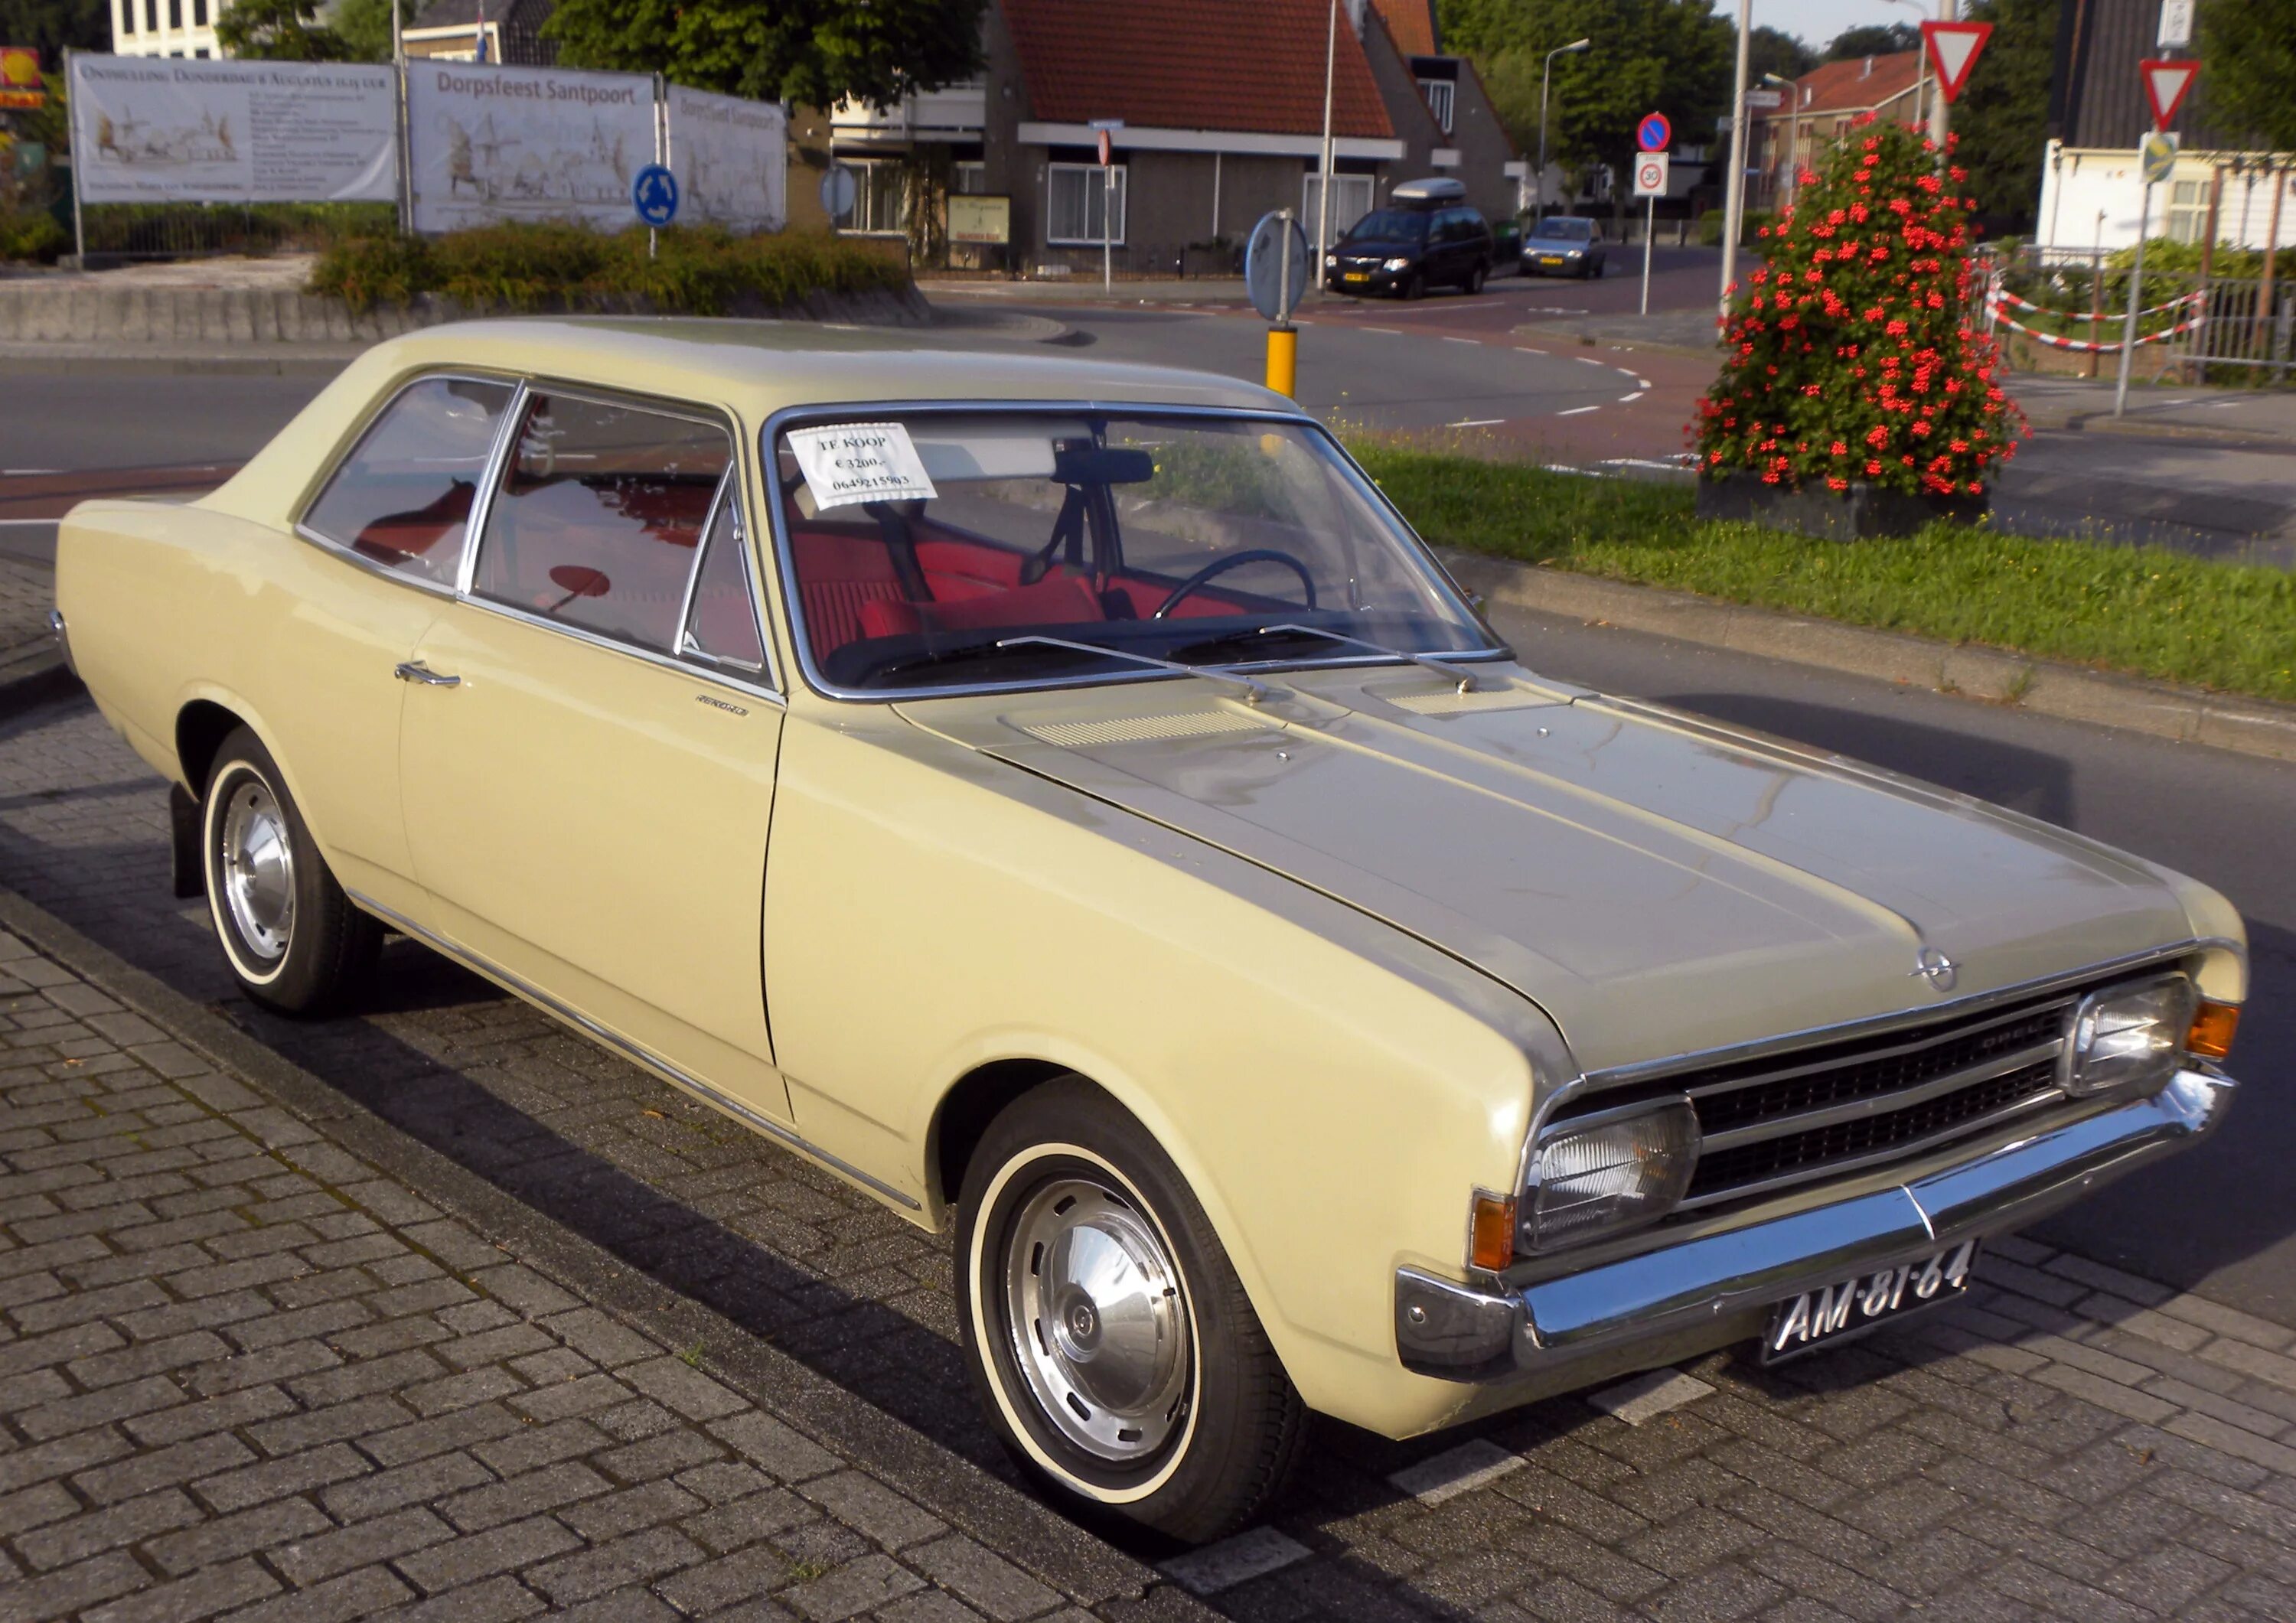 Opel Rekord 1971. Opel Rekord 1900. Opel Rekord, 1967. Opel Rekord Coupe.